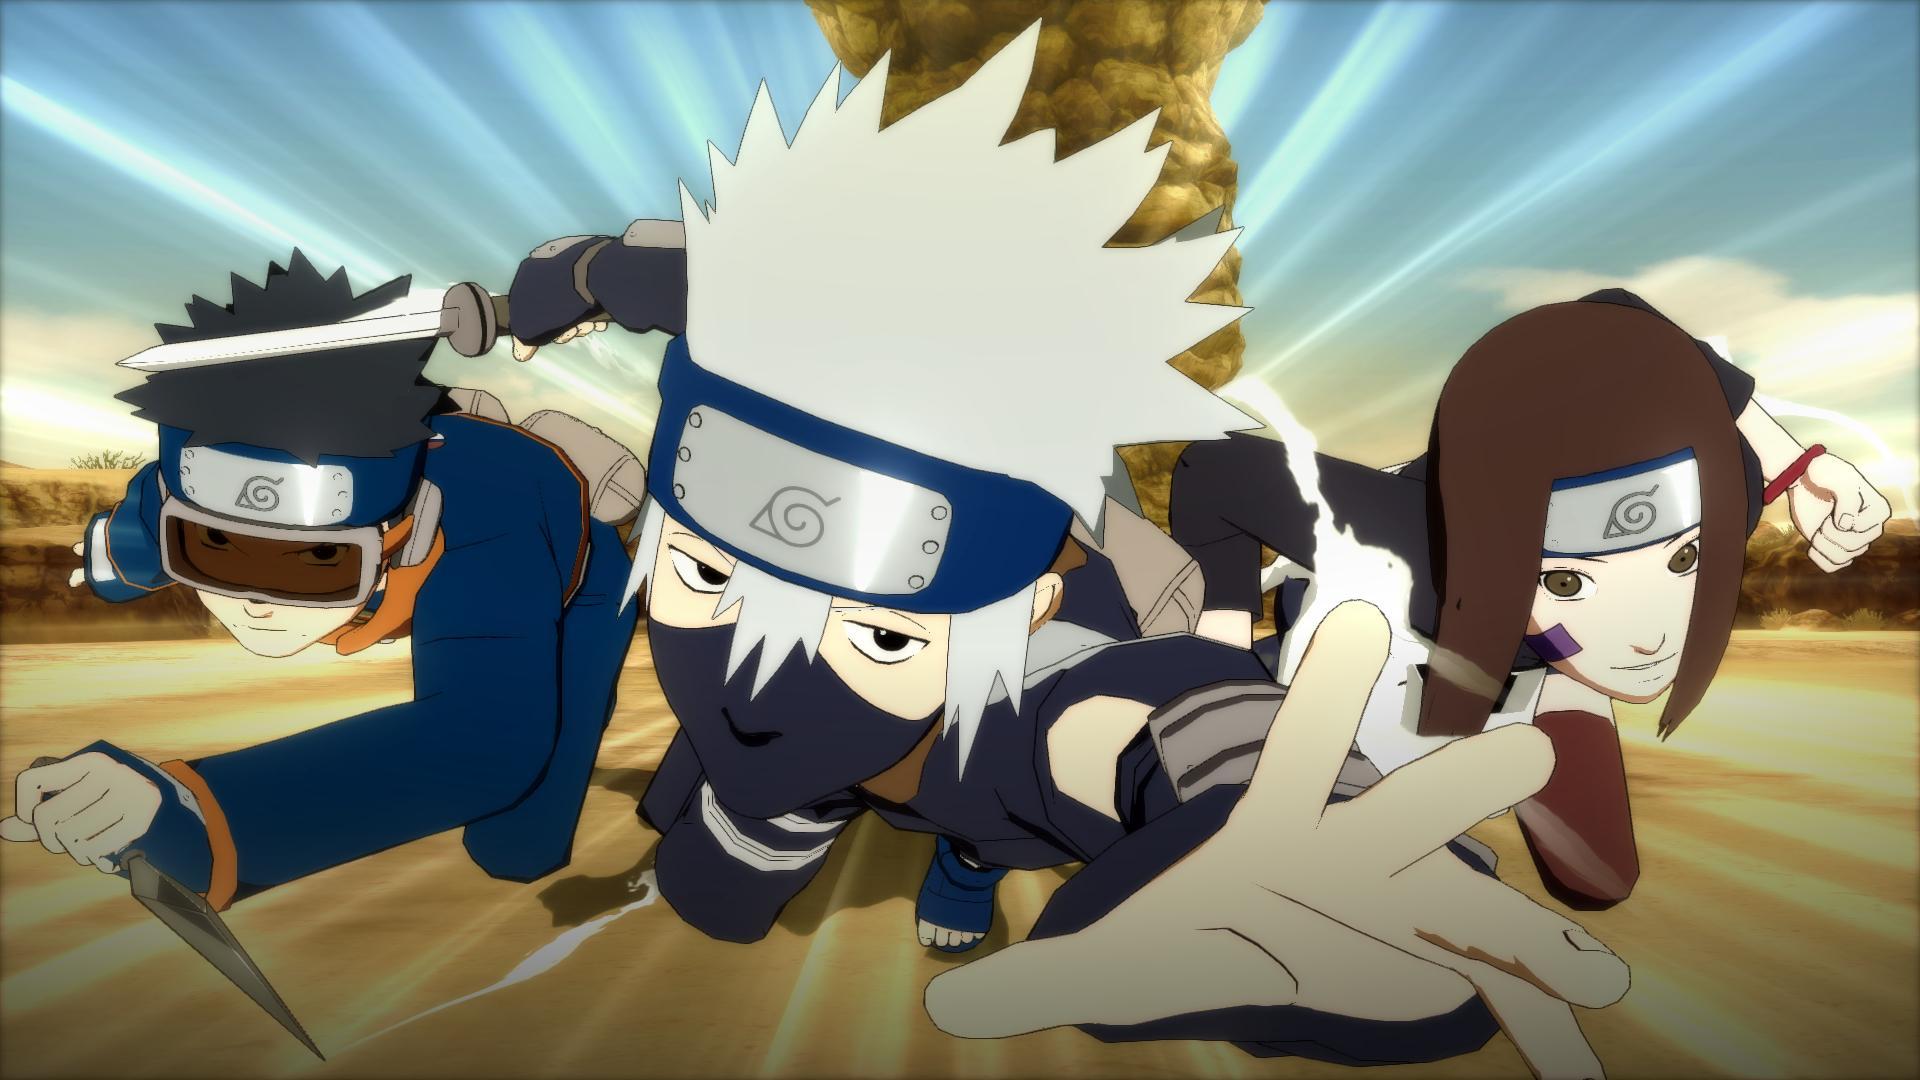 kakashi, obito, rin Full HD Wallpapers and Backgrounds Image